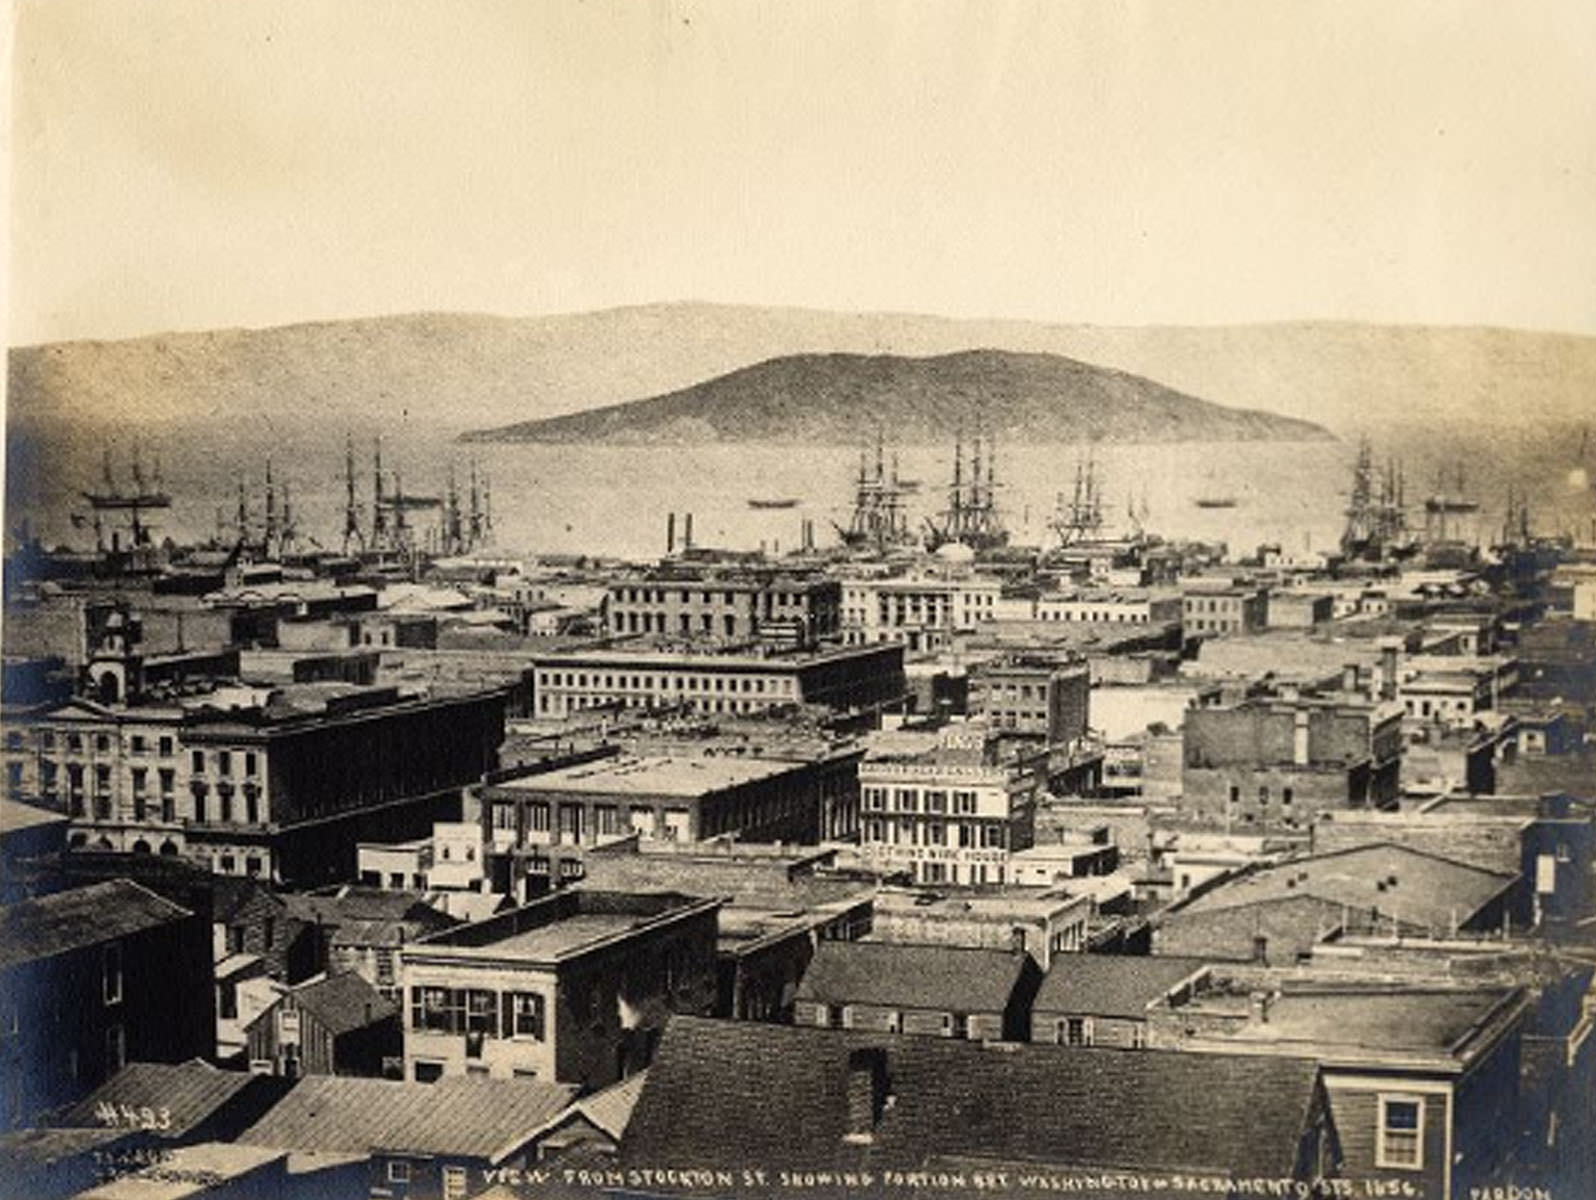 View from Stockton St. showing portion bet. Washington + Sacramento sts, 1856